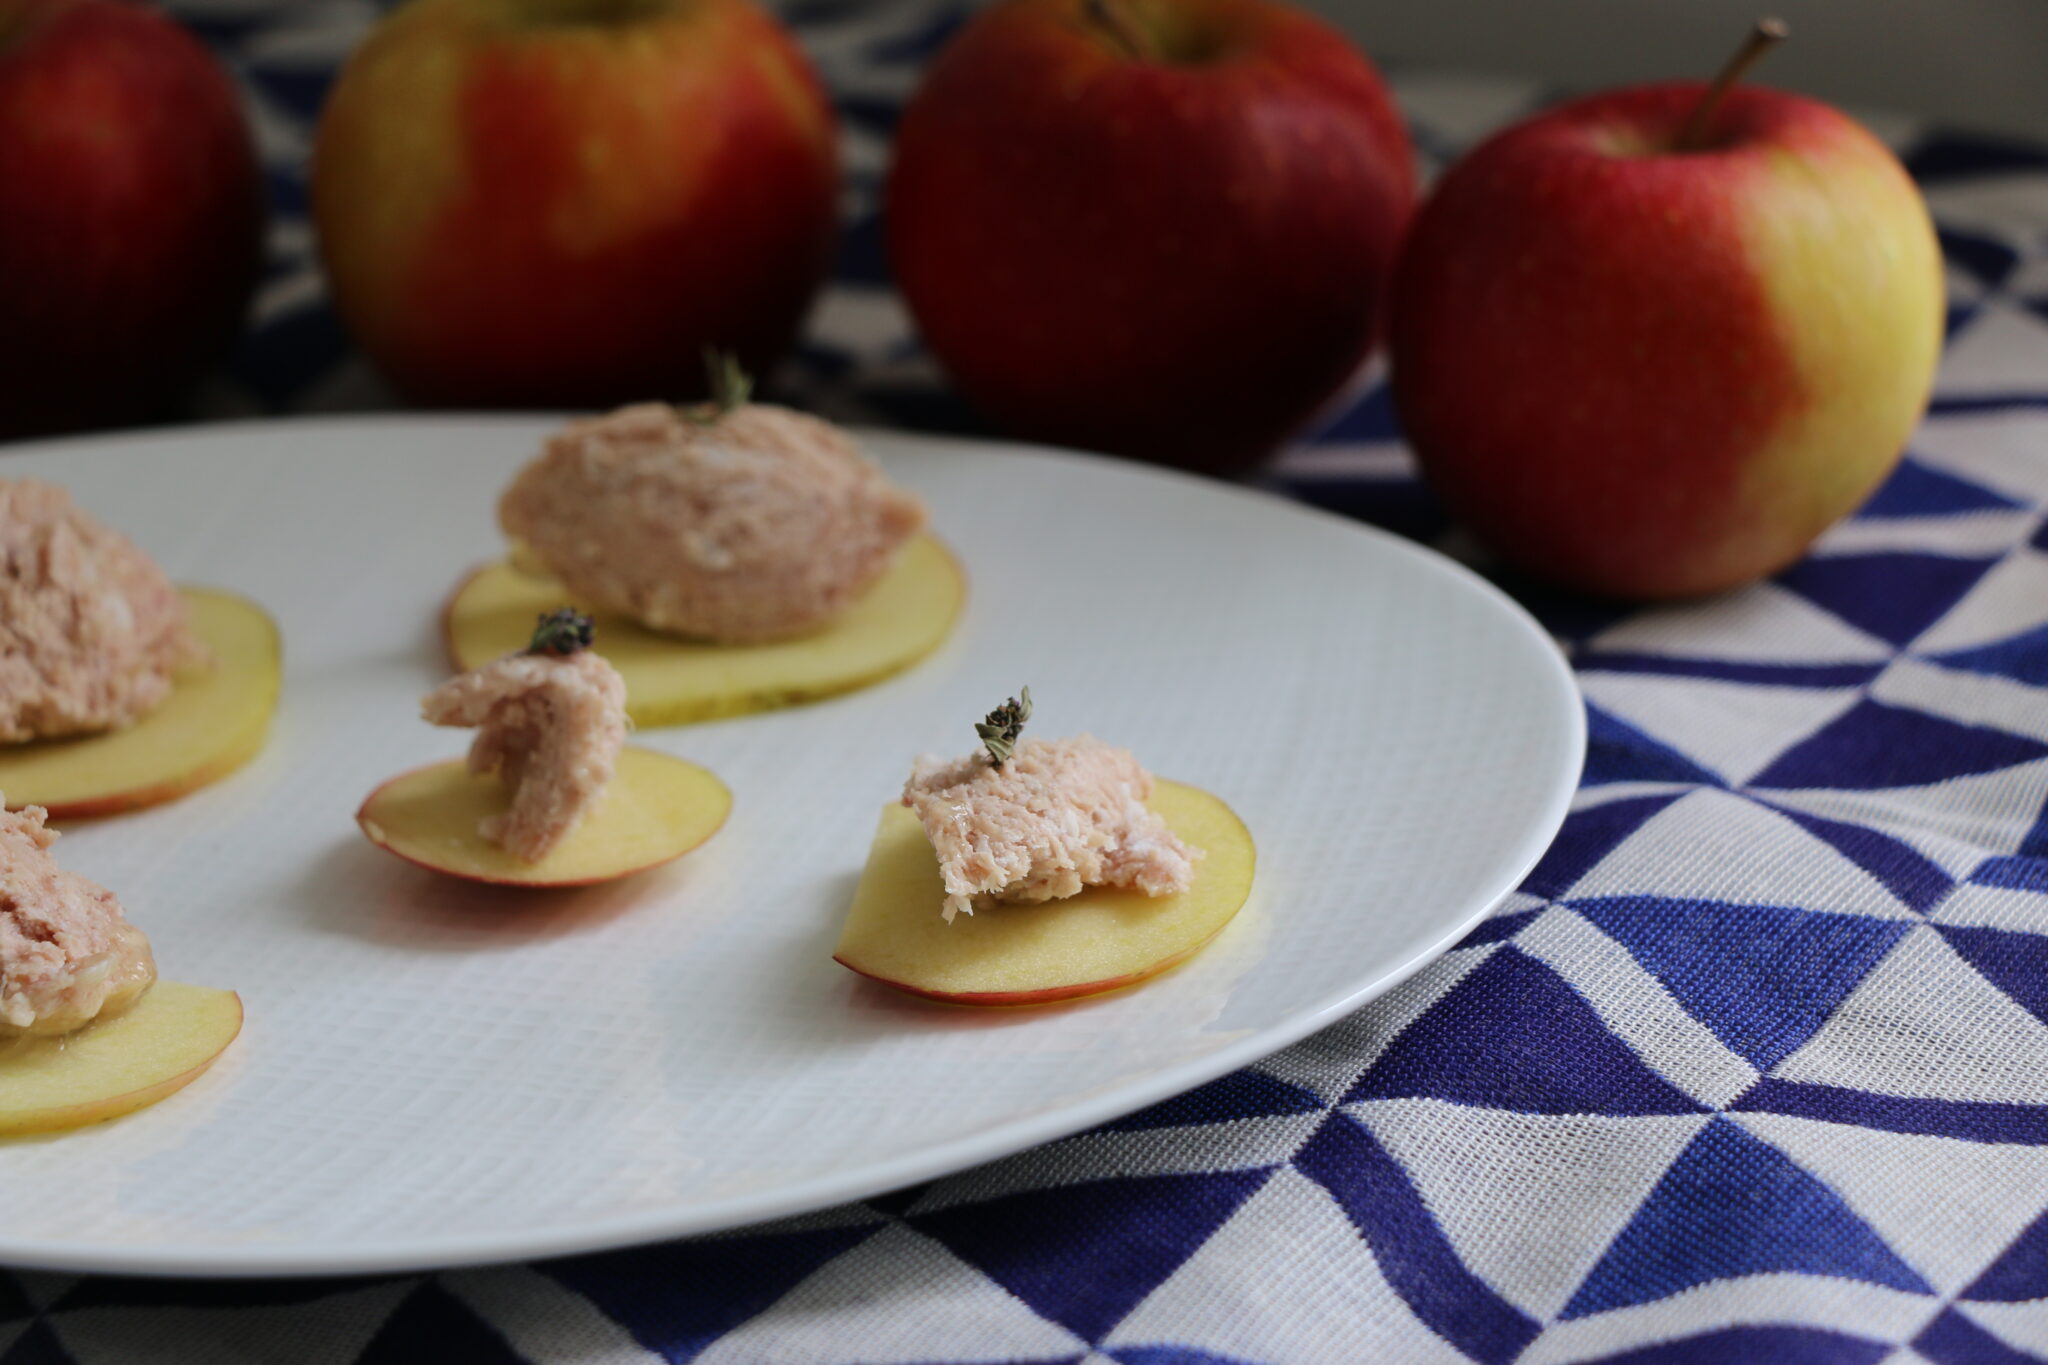 French style appetizer with pork rillettes on appel slices